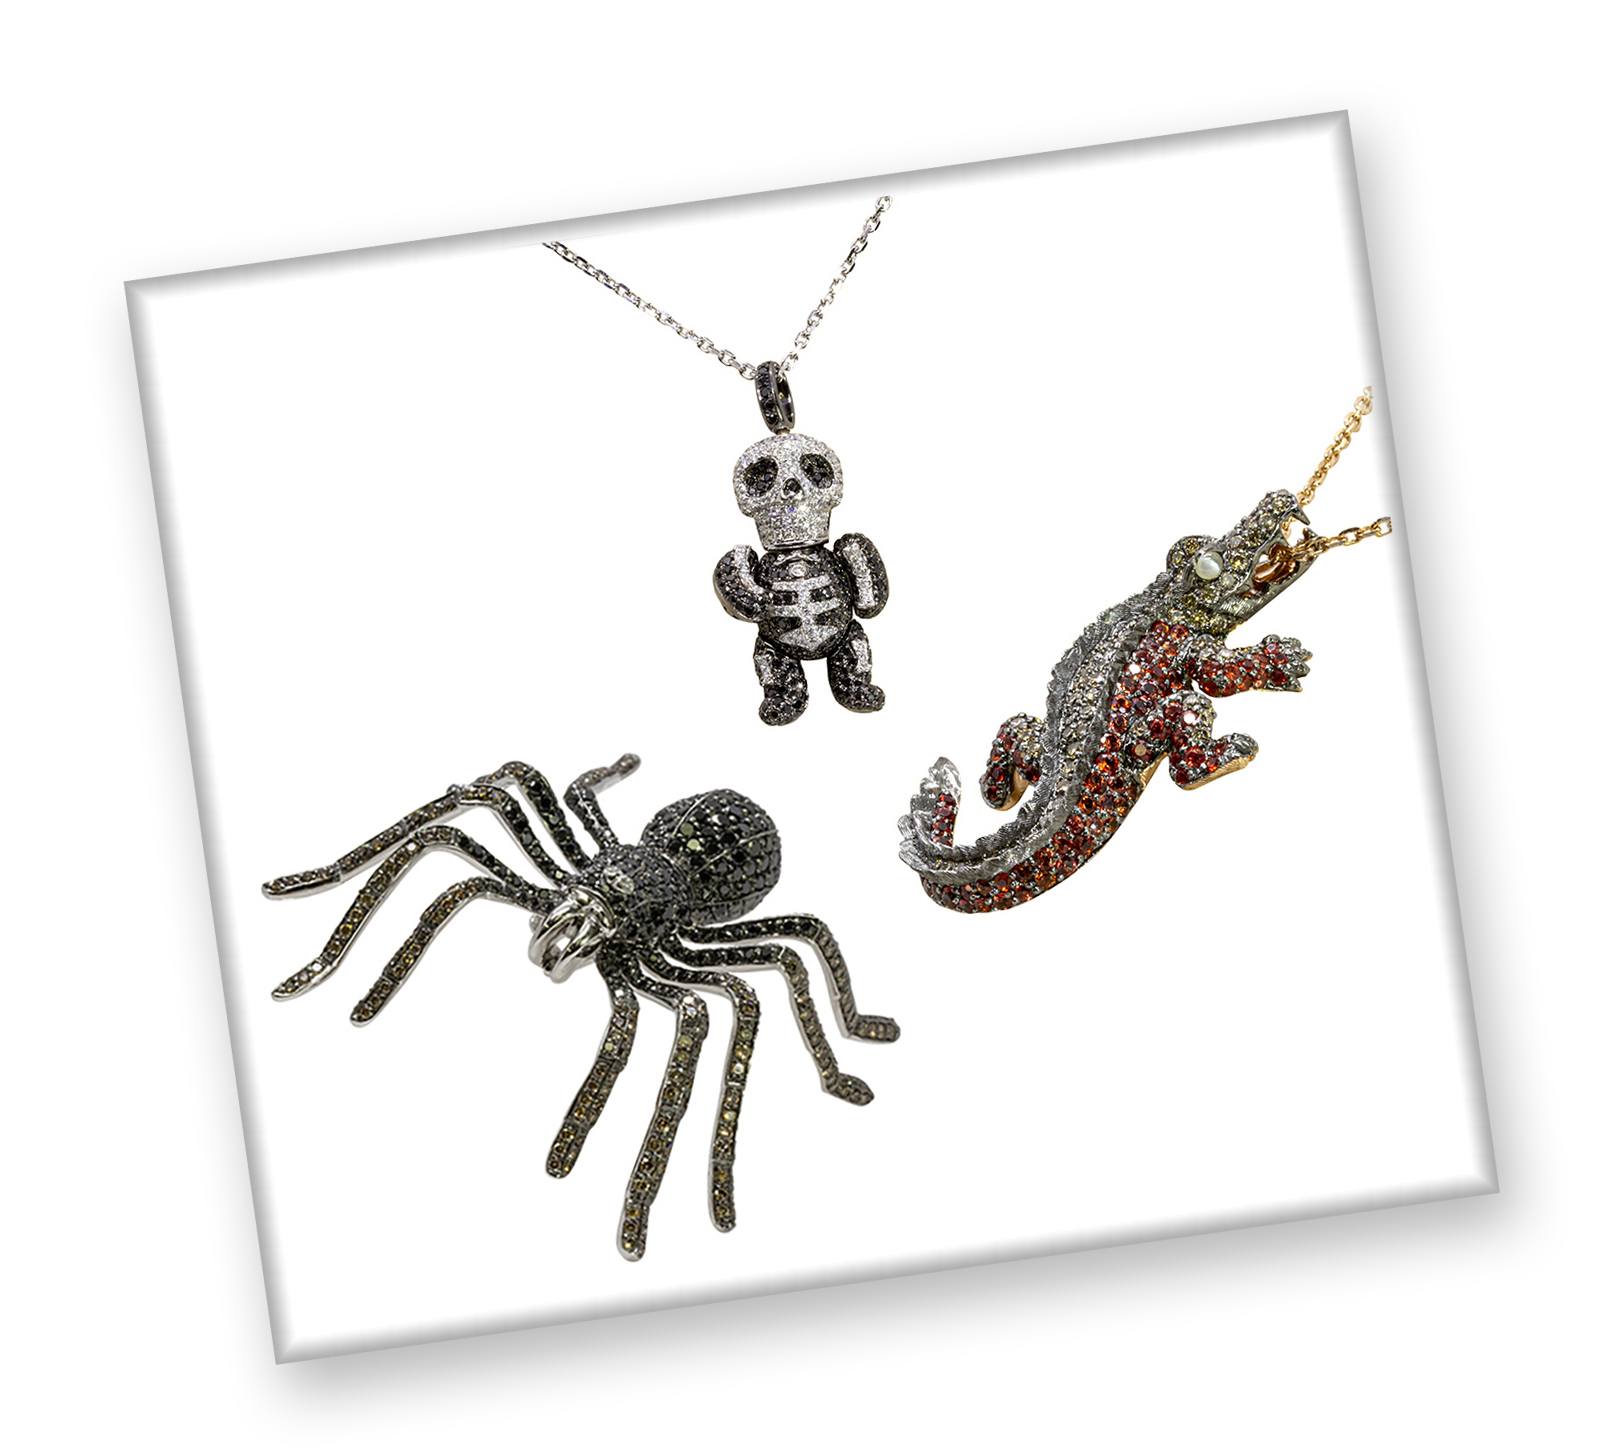 A Spider, a Skeleton and a Crocodile Walked into a Jewelry Store…